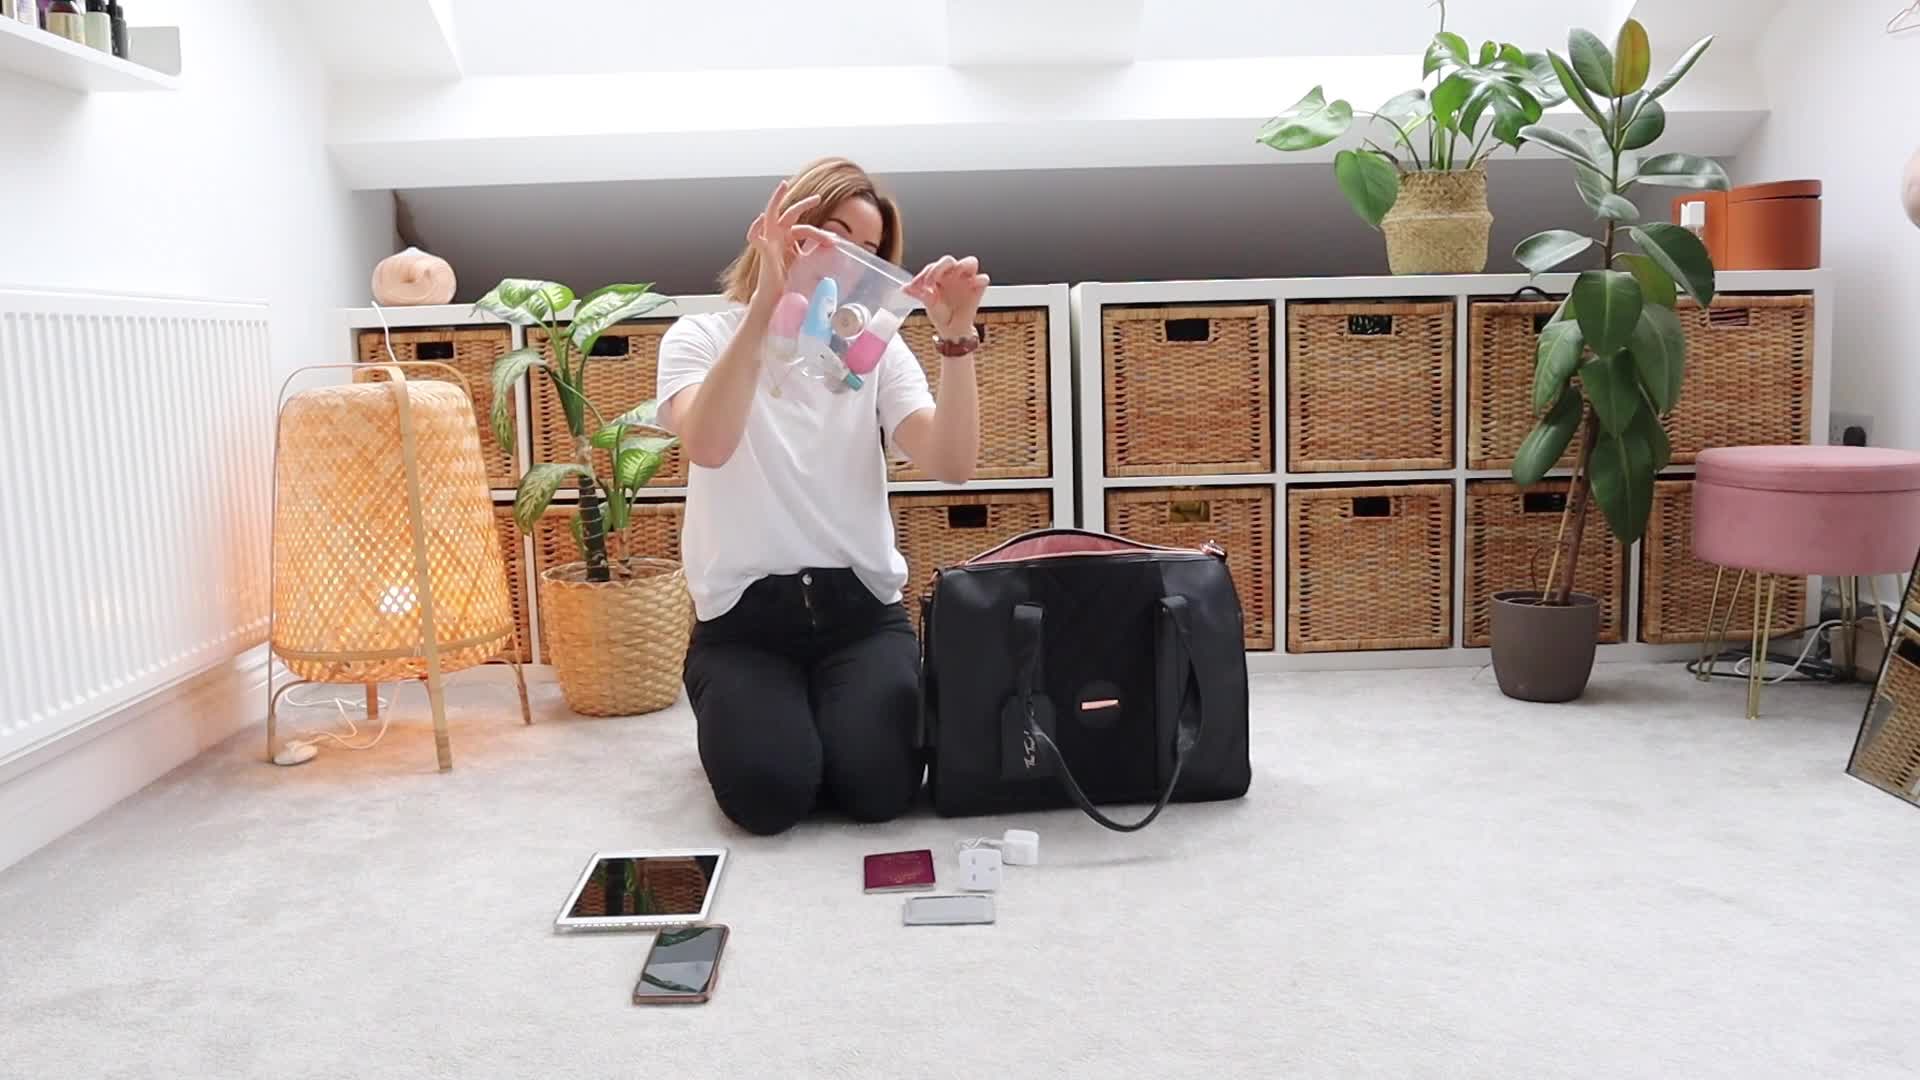 The Travel Hack Luggage and the all new Tote Bag - The Travel Hack